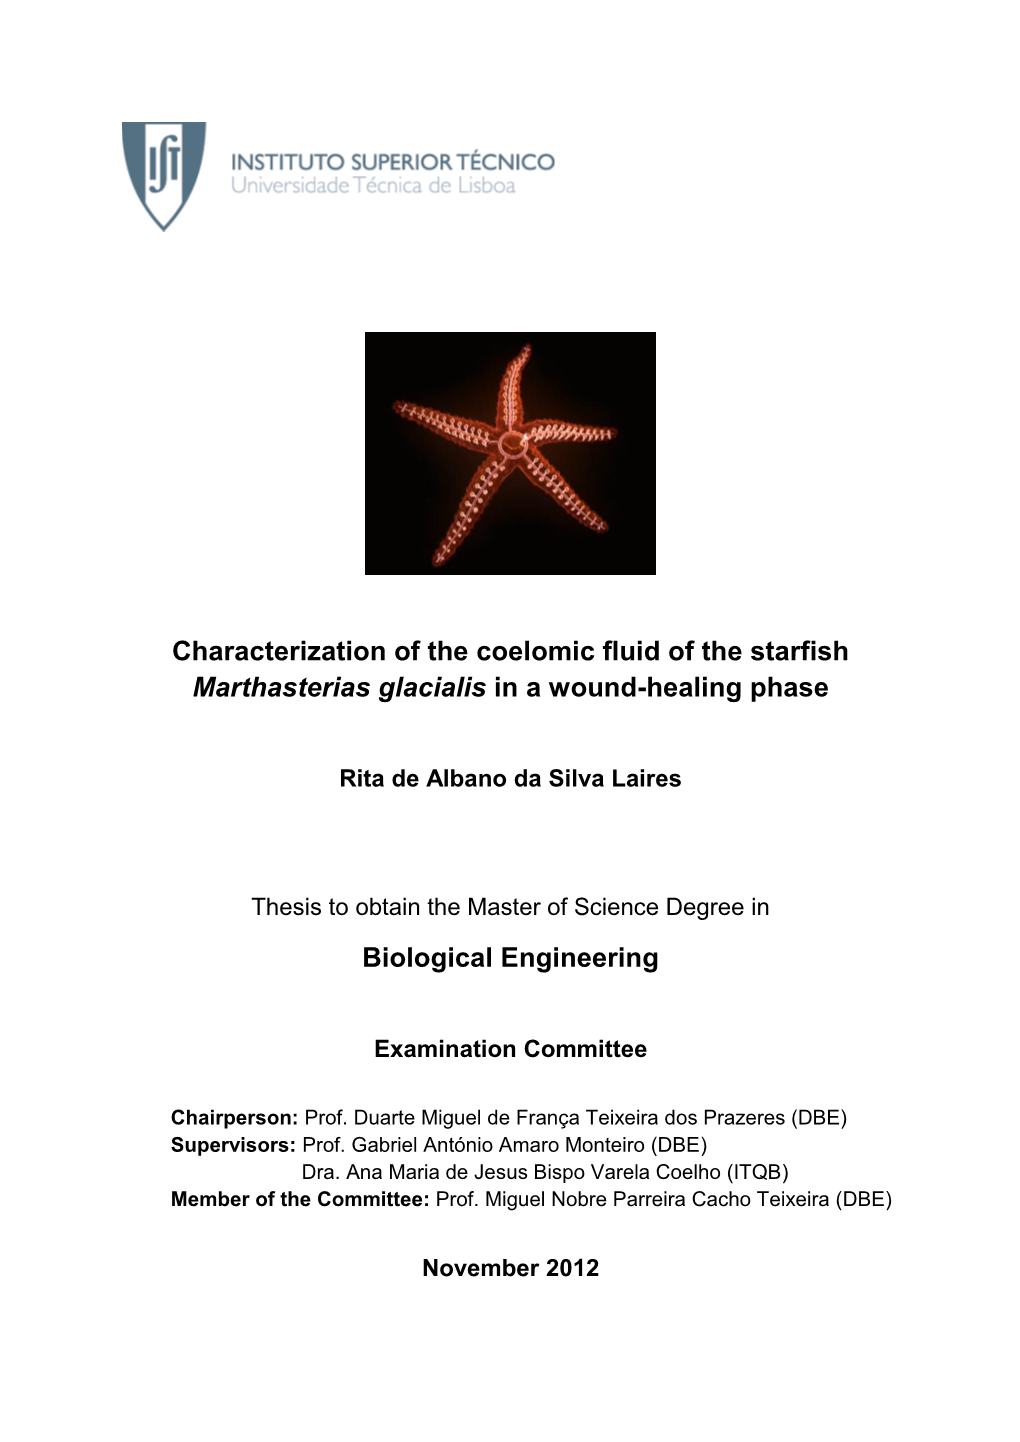 Characterization of the Coelomic Fluid of the Starfish Marthasterias Glacialis in a Wound-Healing Phase Biological Engineering